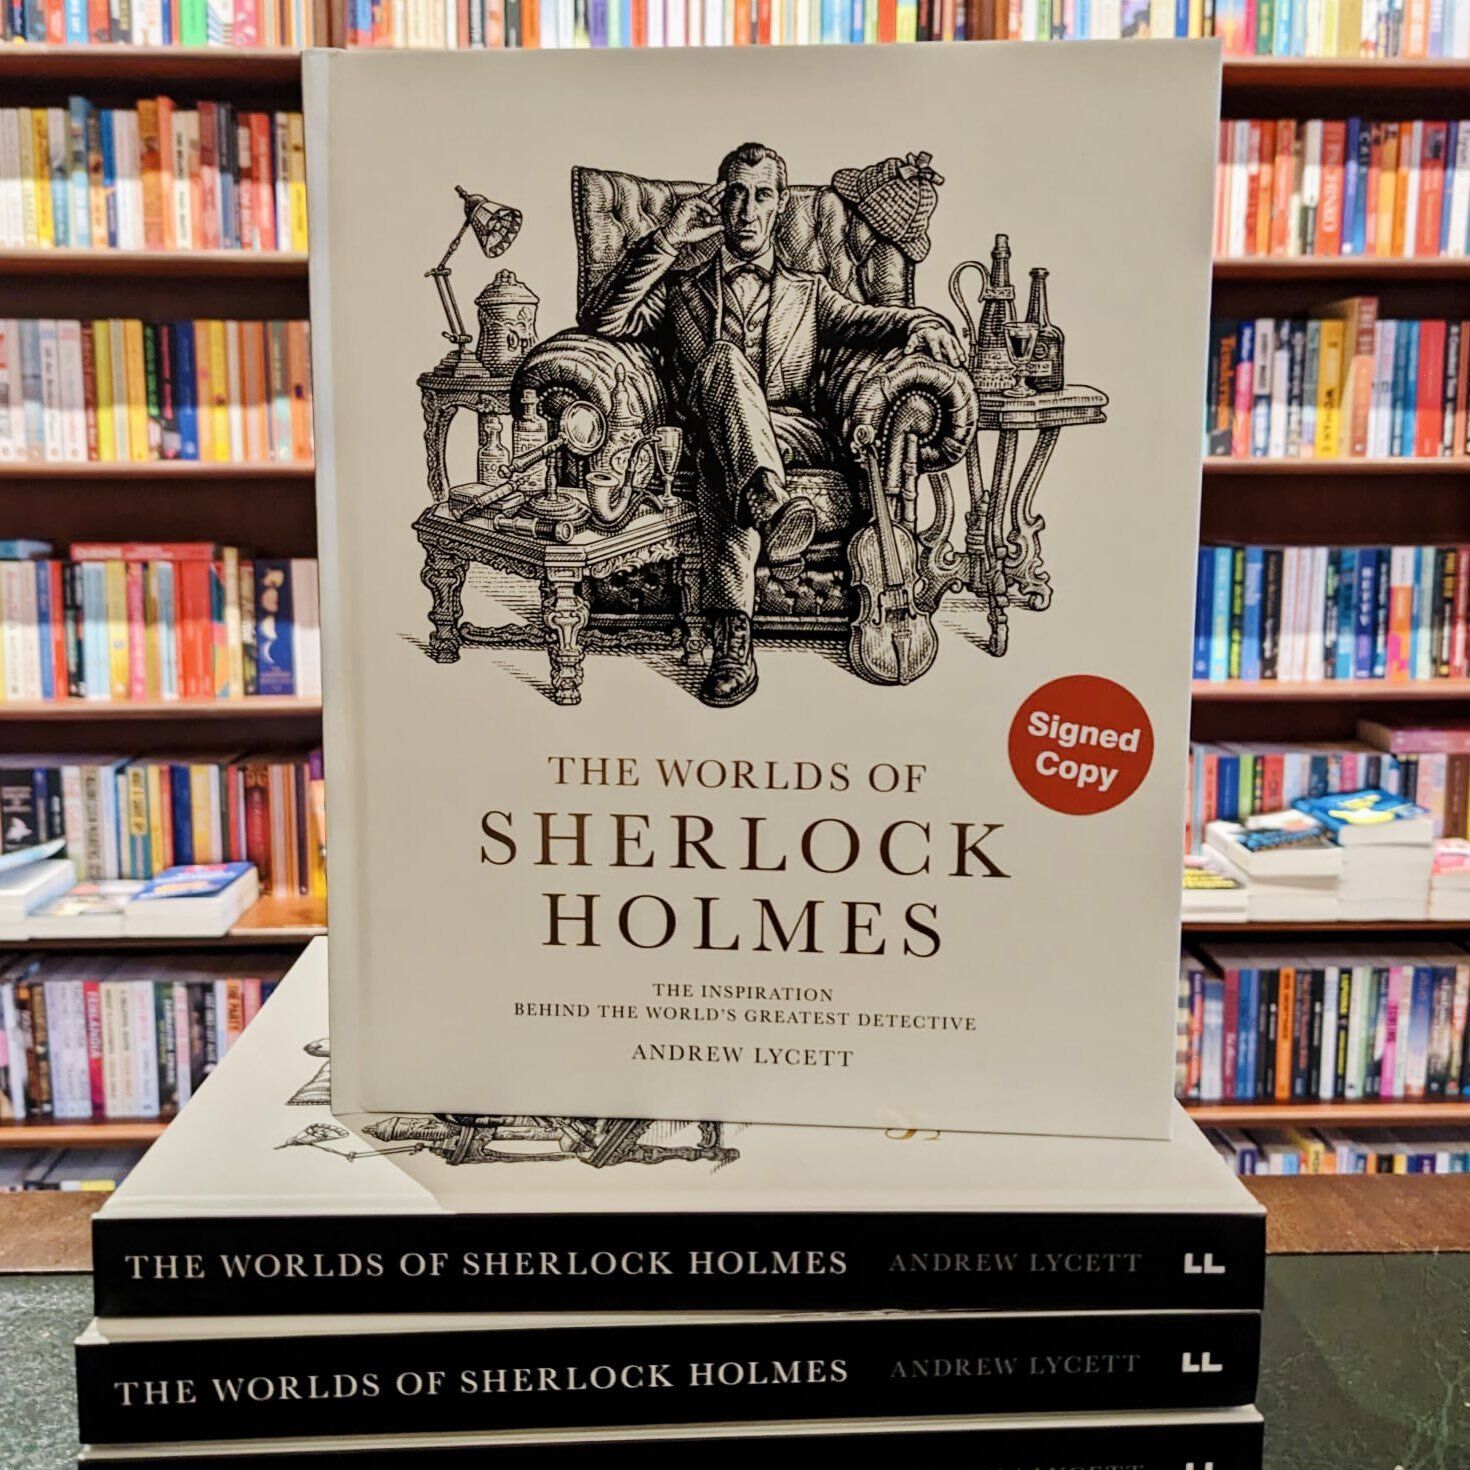 Andrew Lycett: The Worlds of Sherlock Holmes